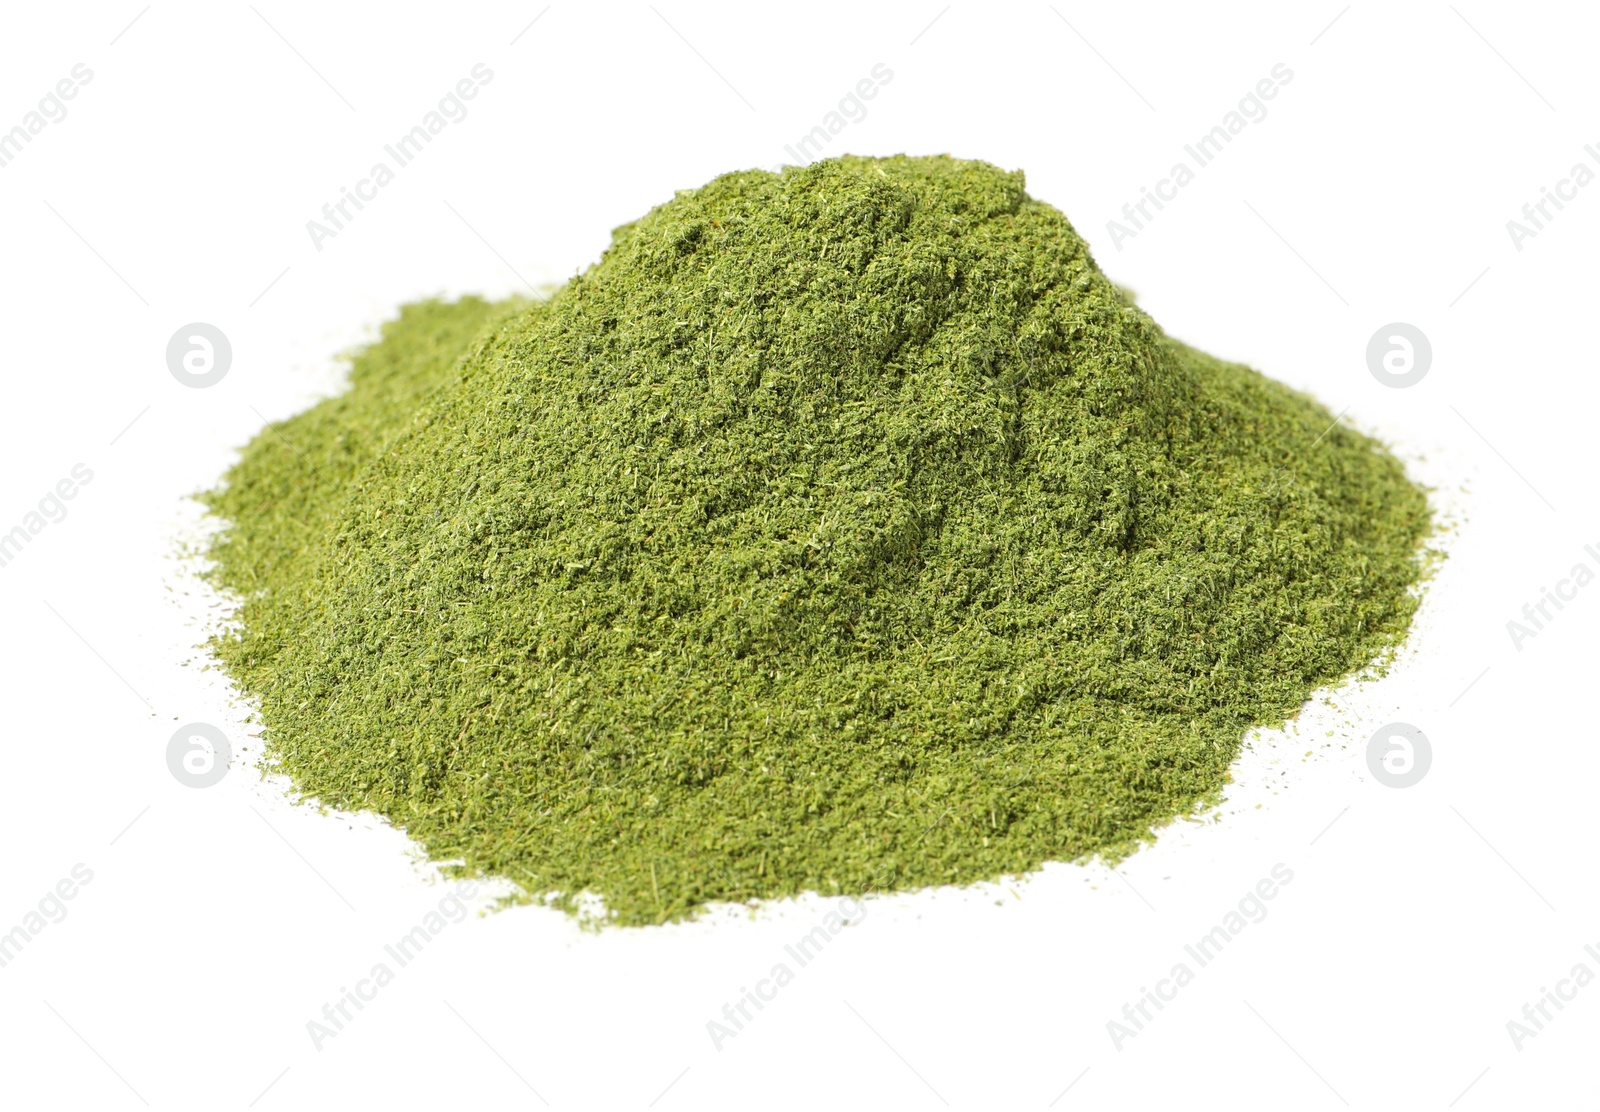 Photo of Pile of wheat grass powder isolated on white